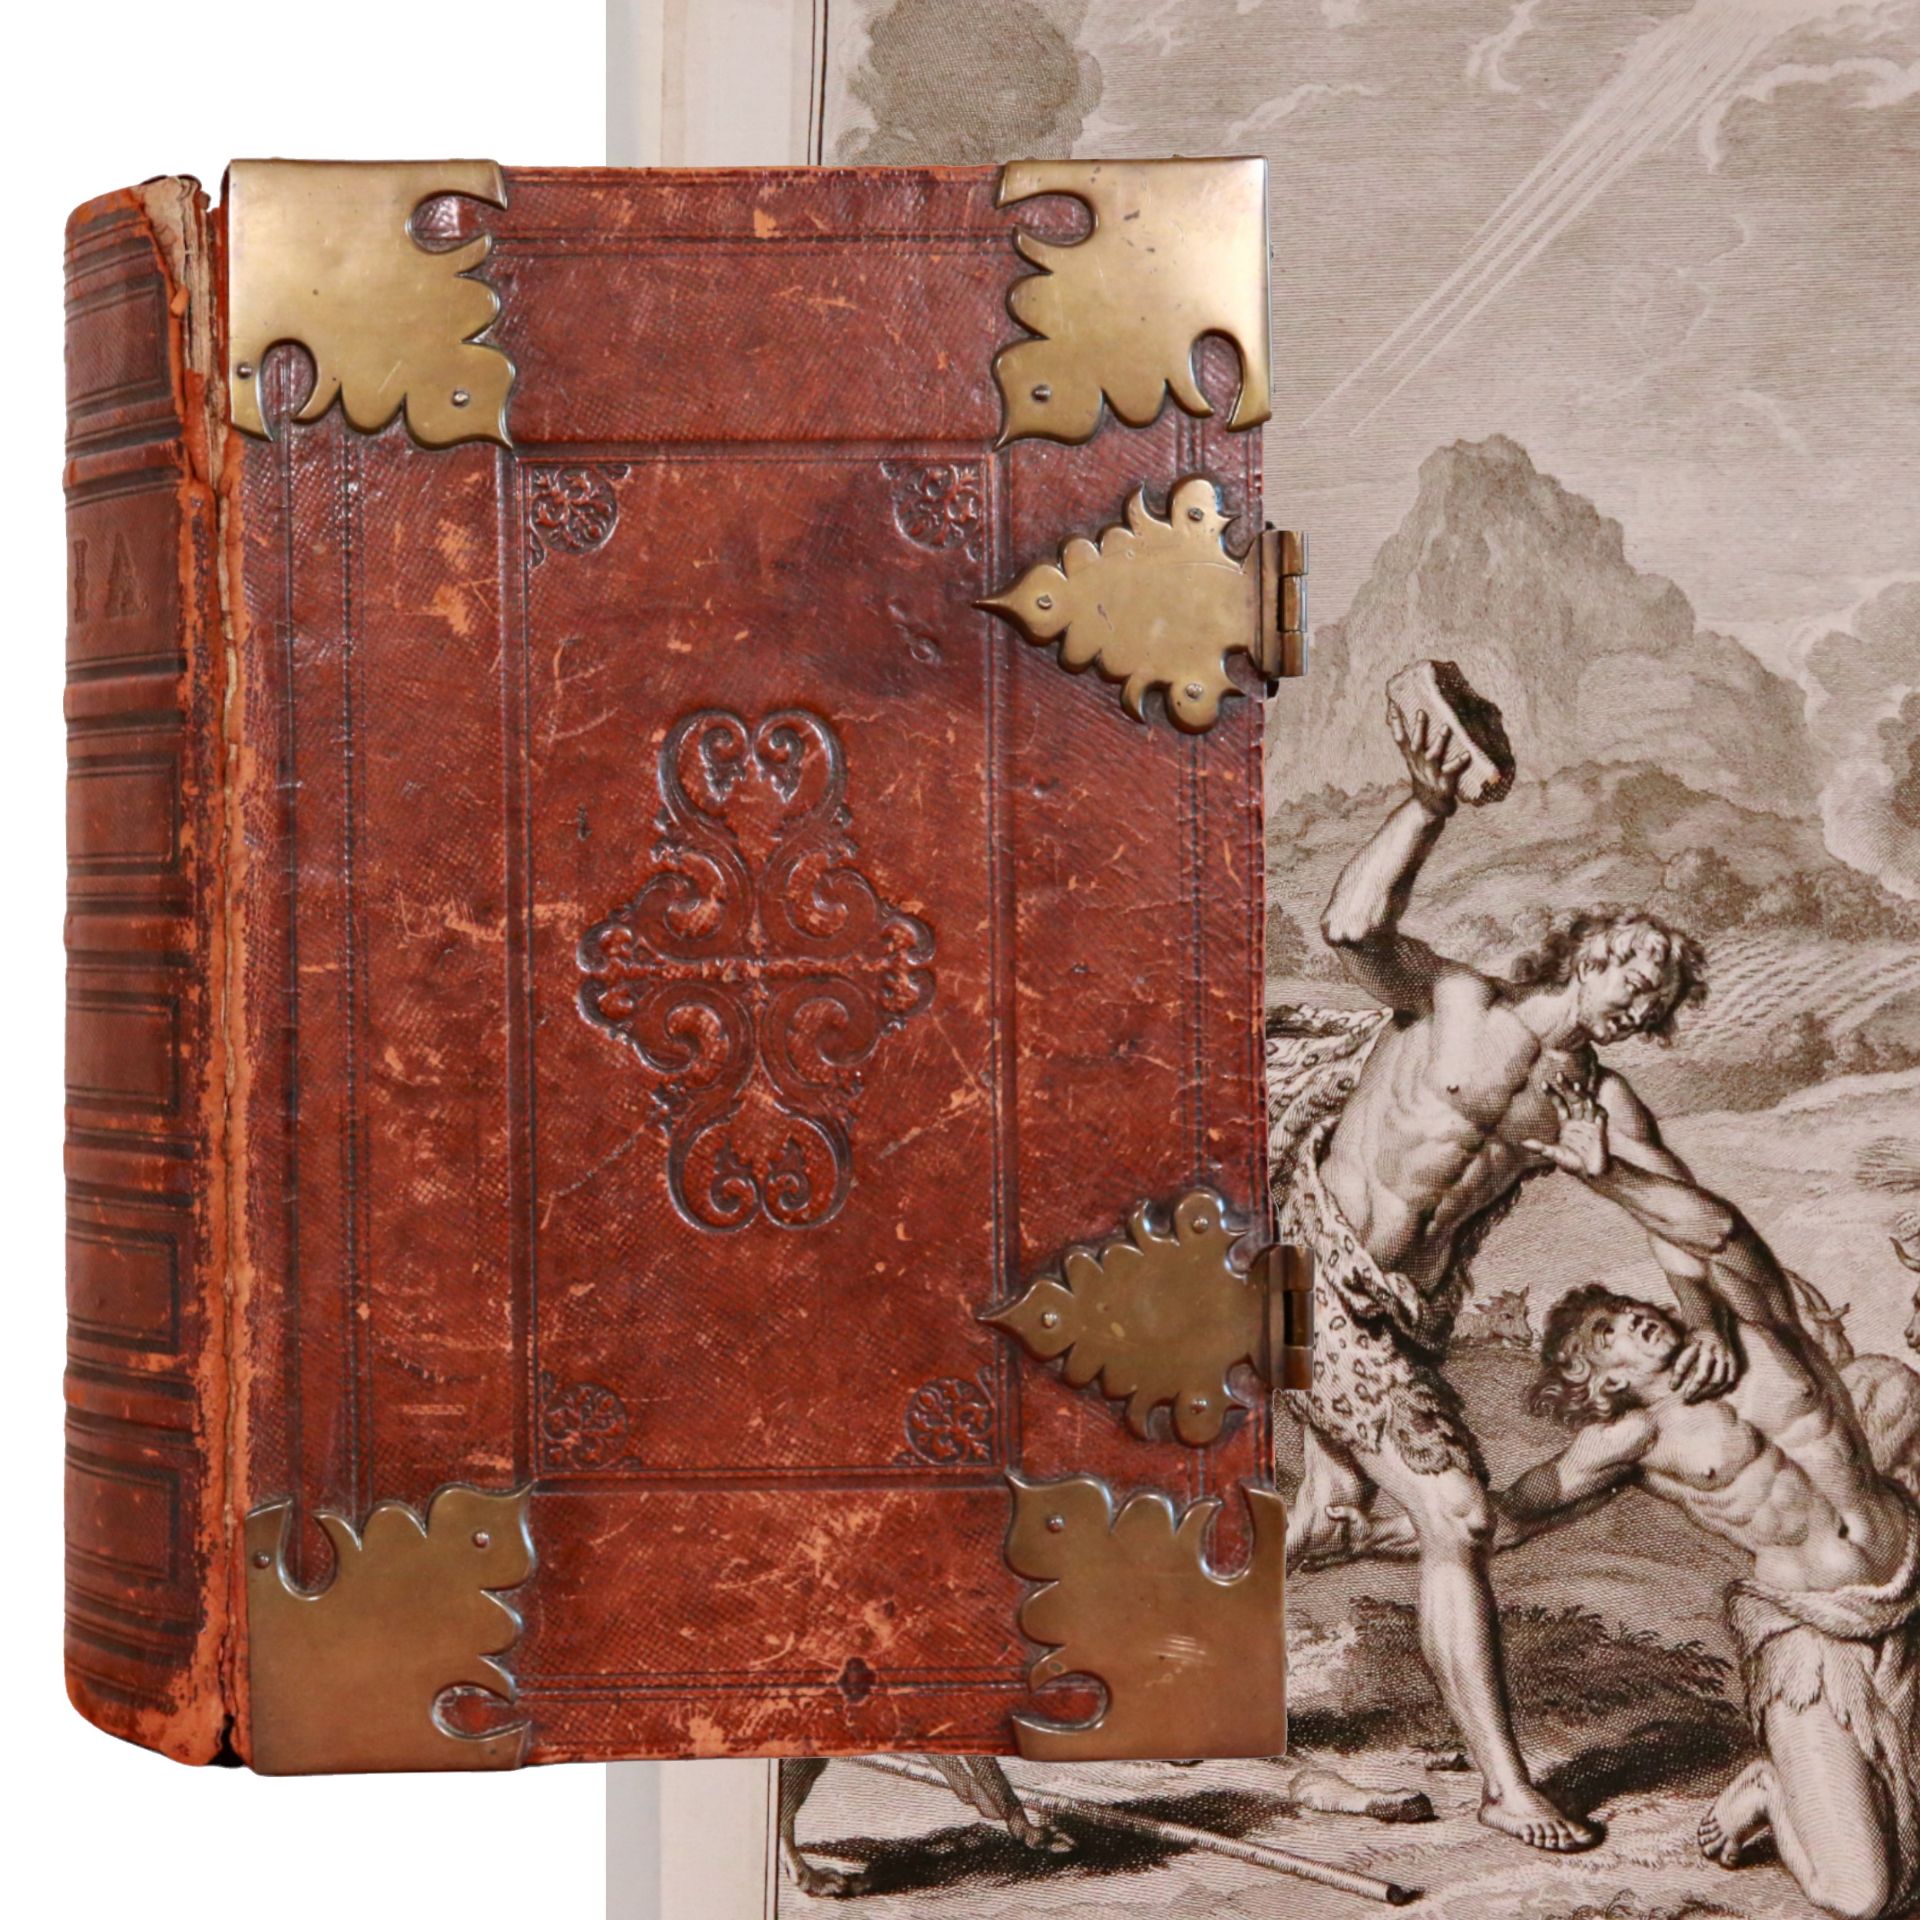 Rare Bible, High quality engravings, Large size, bound in leather, Amsterdam, 1663.